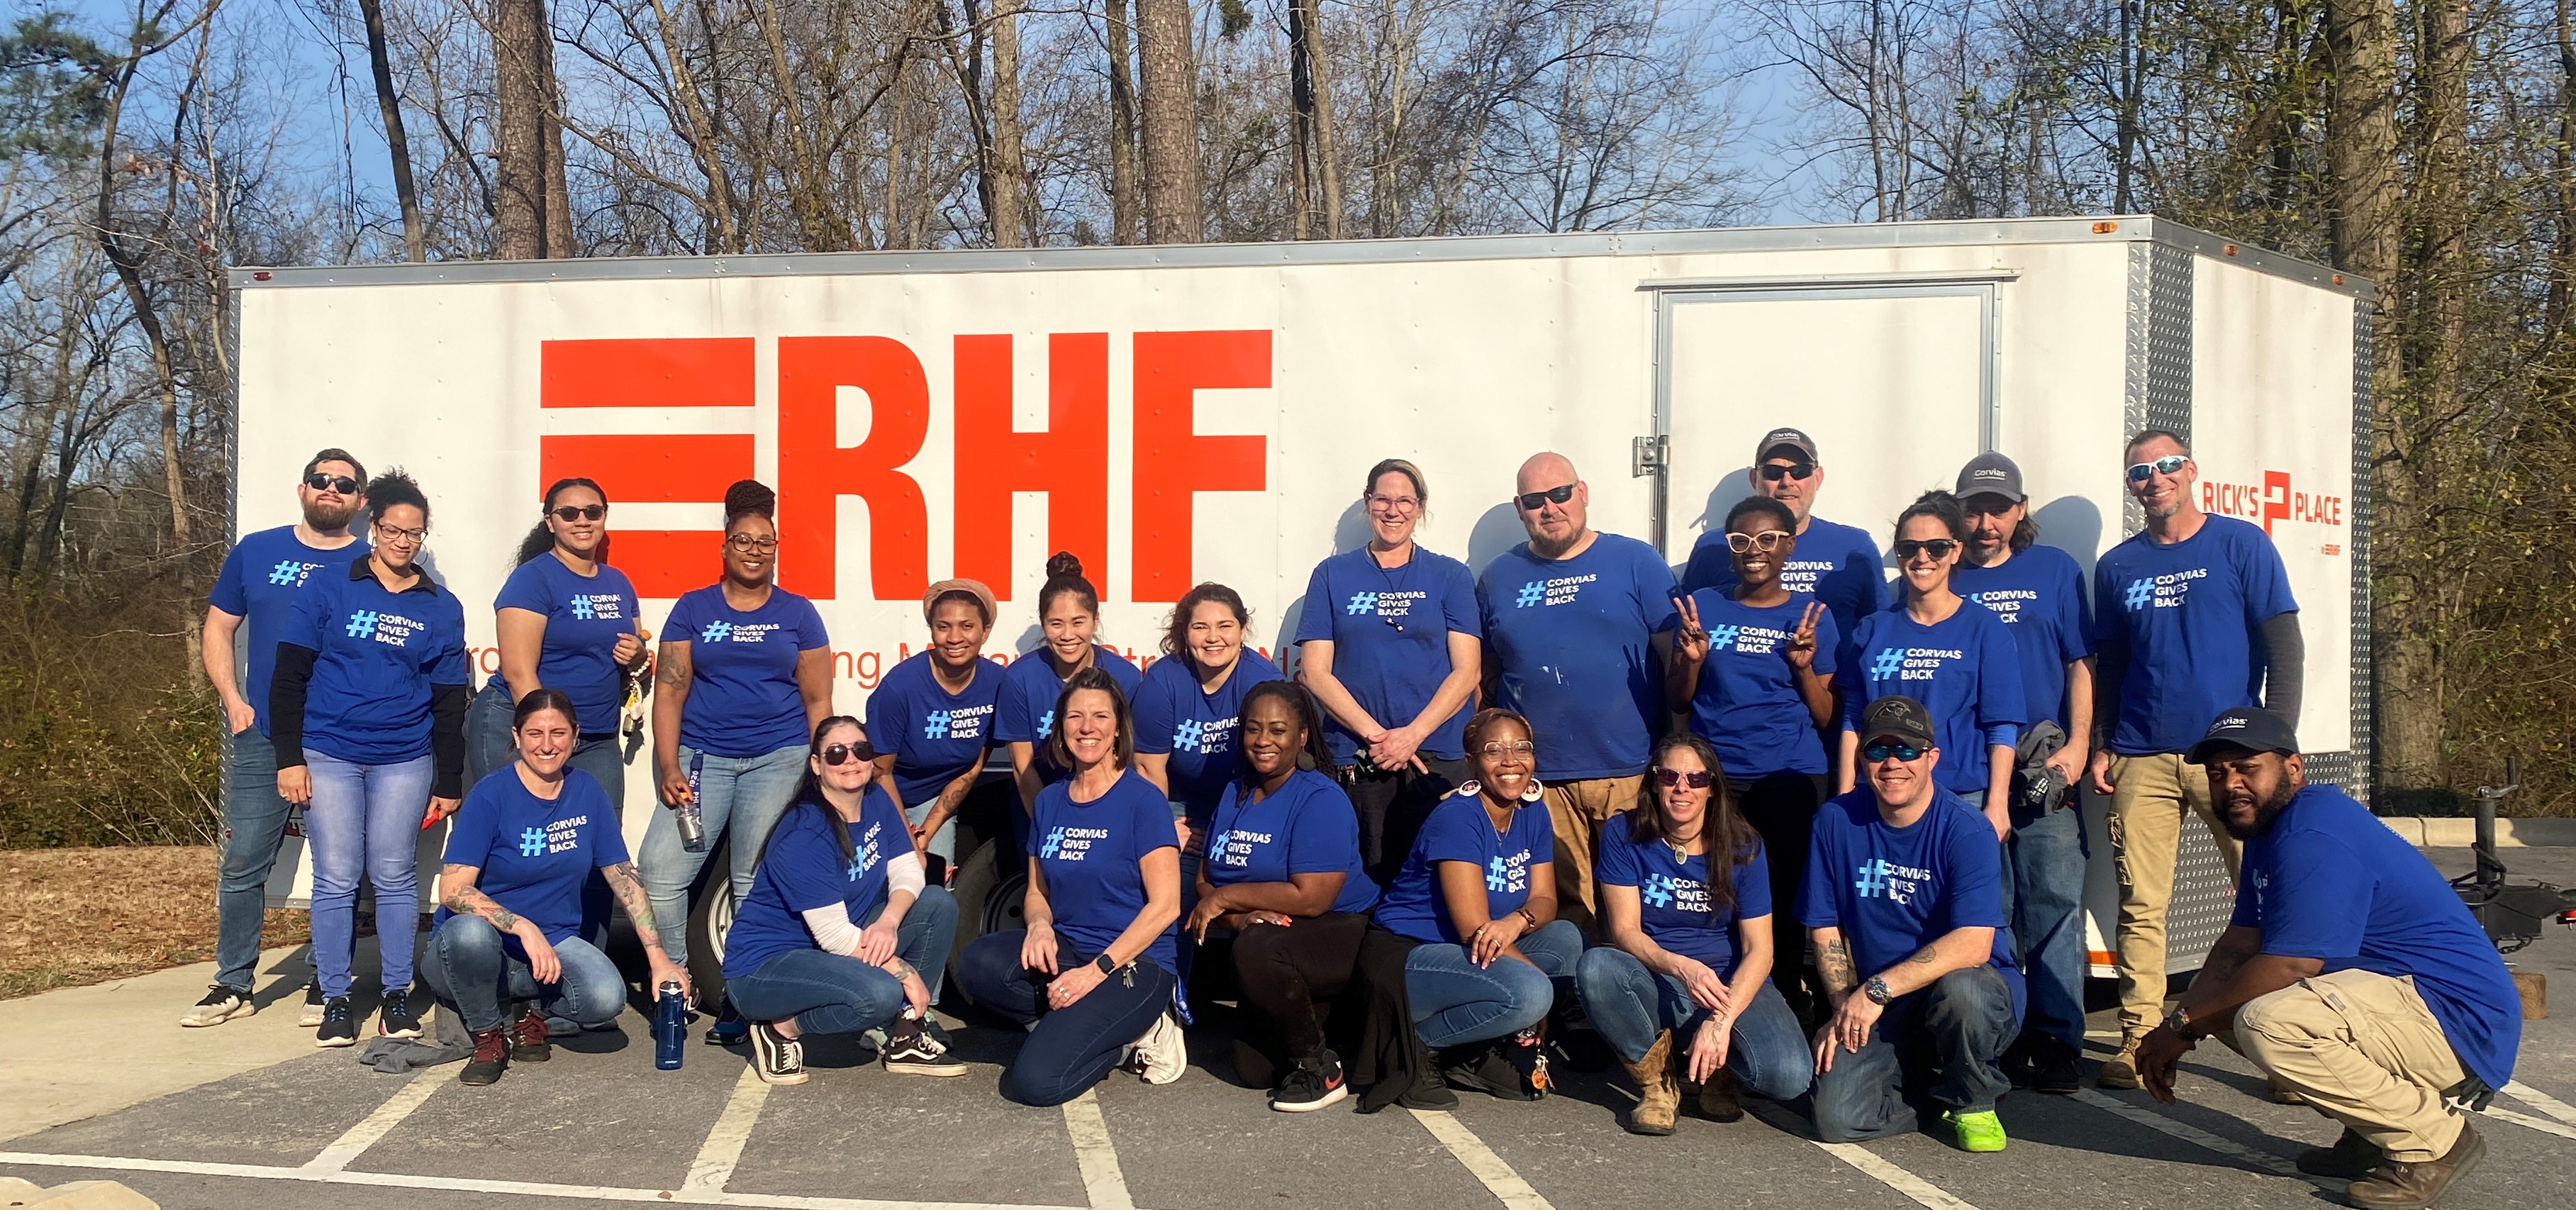 Corvias team members at Fort Liberty spend a day volunteering at Rick's Place, a 50-acre greenspace for single soldiers and military families.